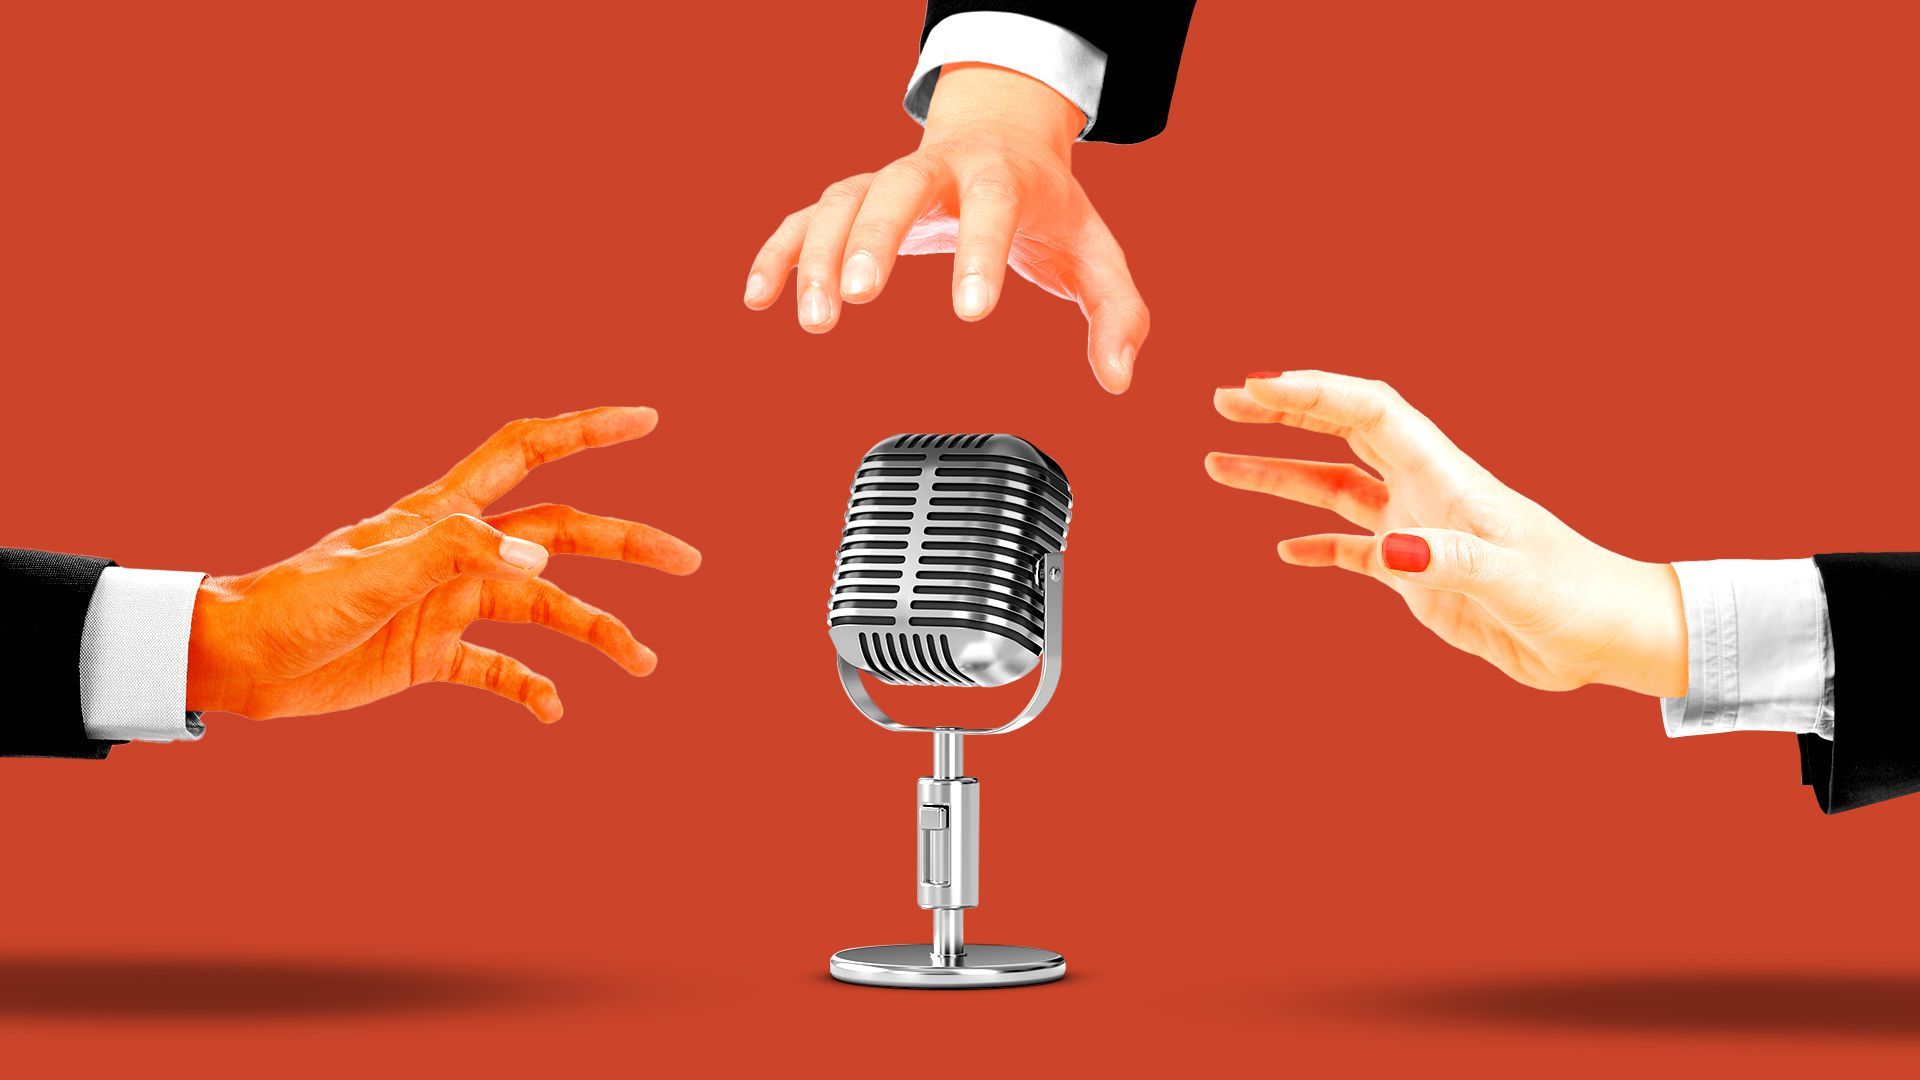 Illustration of hands reaching out for an old fashioned microphone.